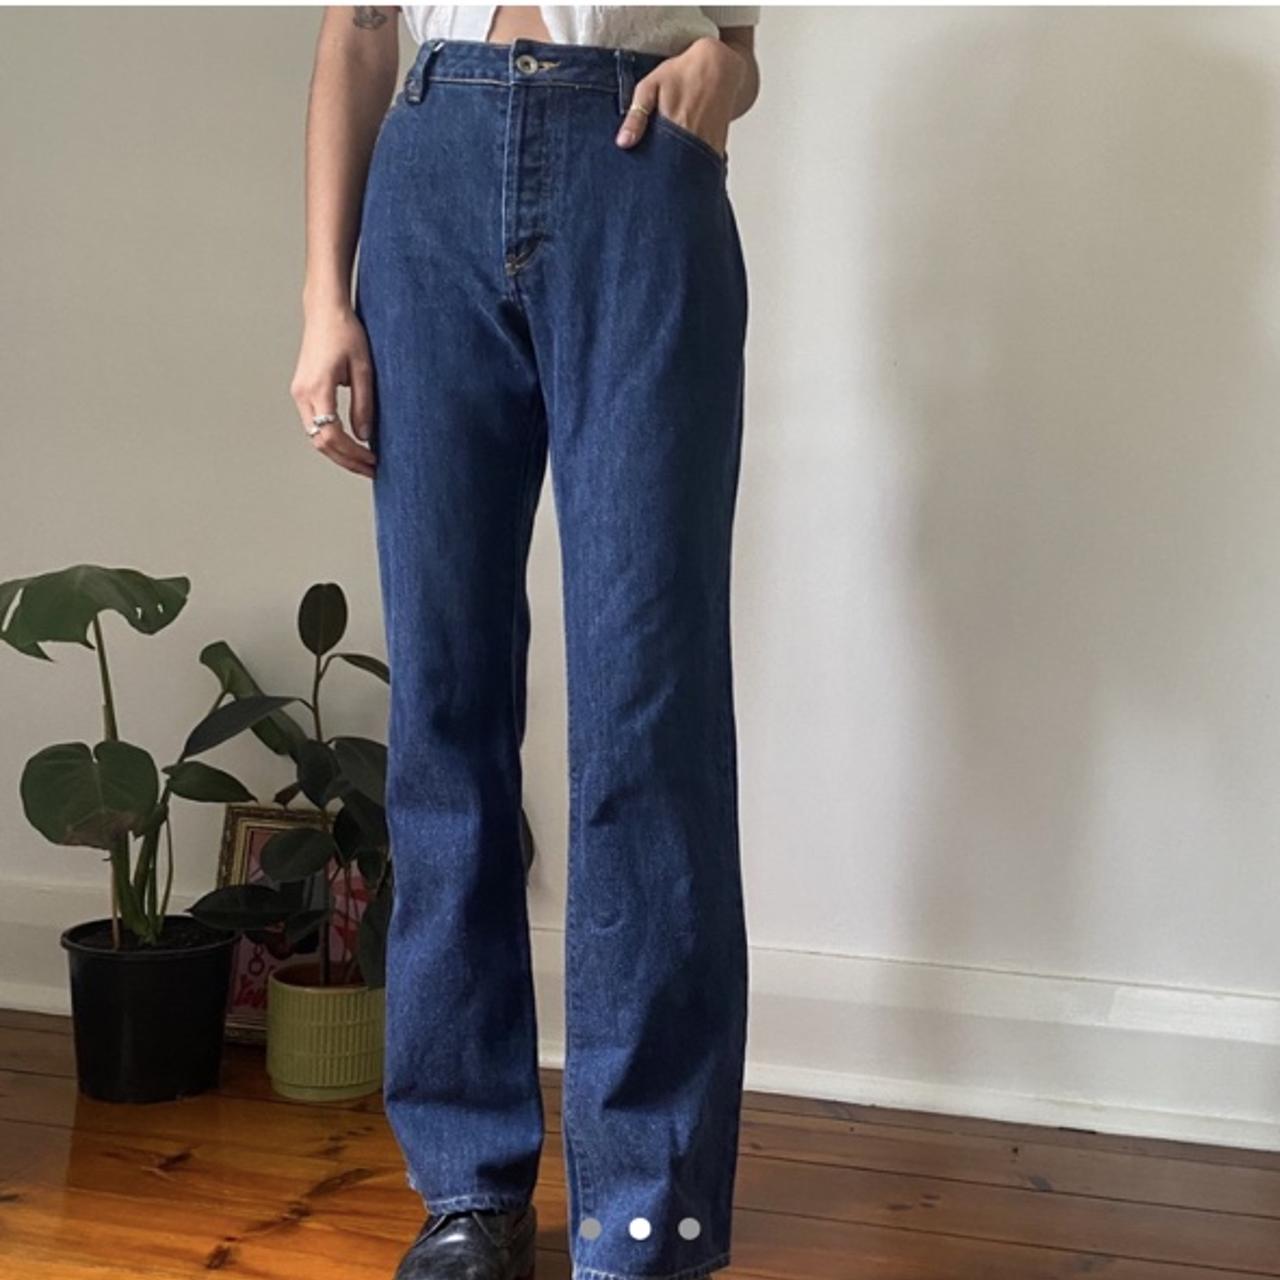 Vintage DKNY mid rise jeans! These are really... - Depop